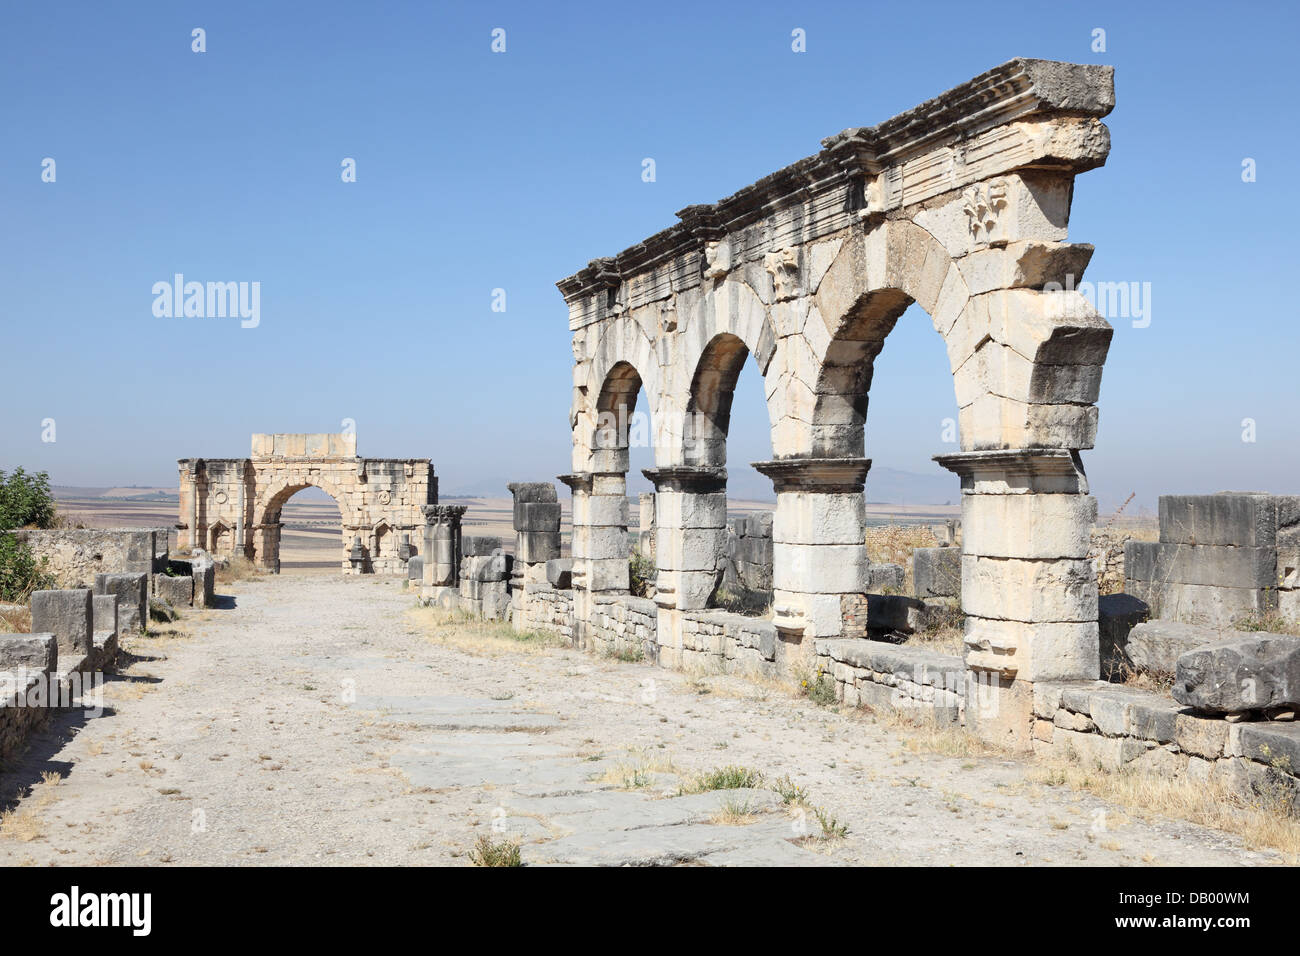 The Arch of Caracalla at Volubilis, Morocco, North Africa Stock Photo